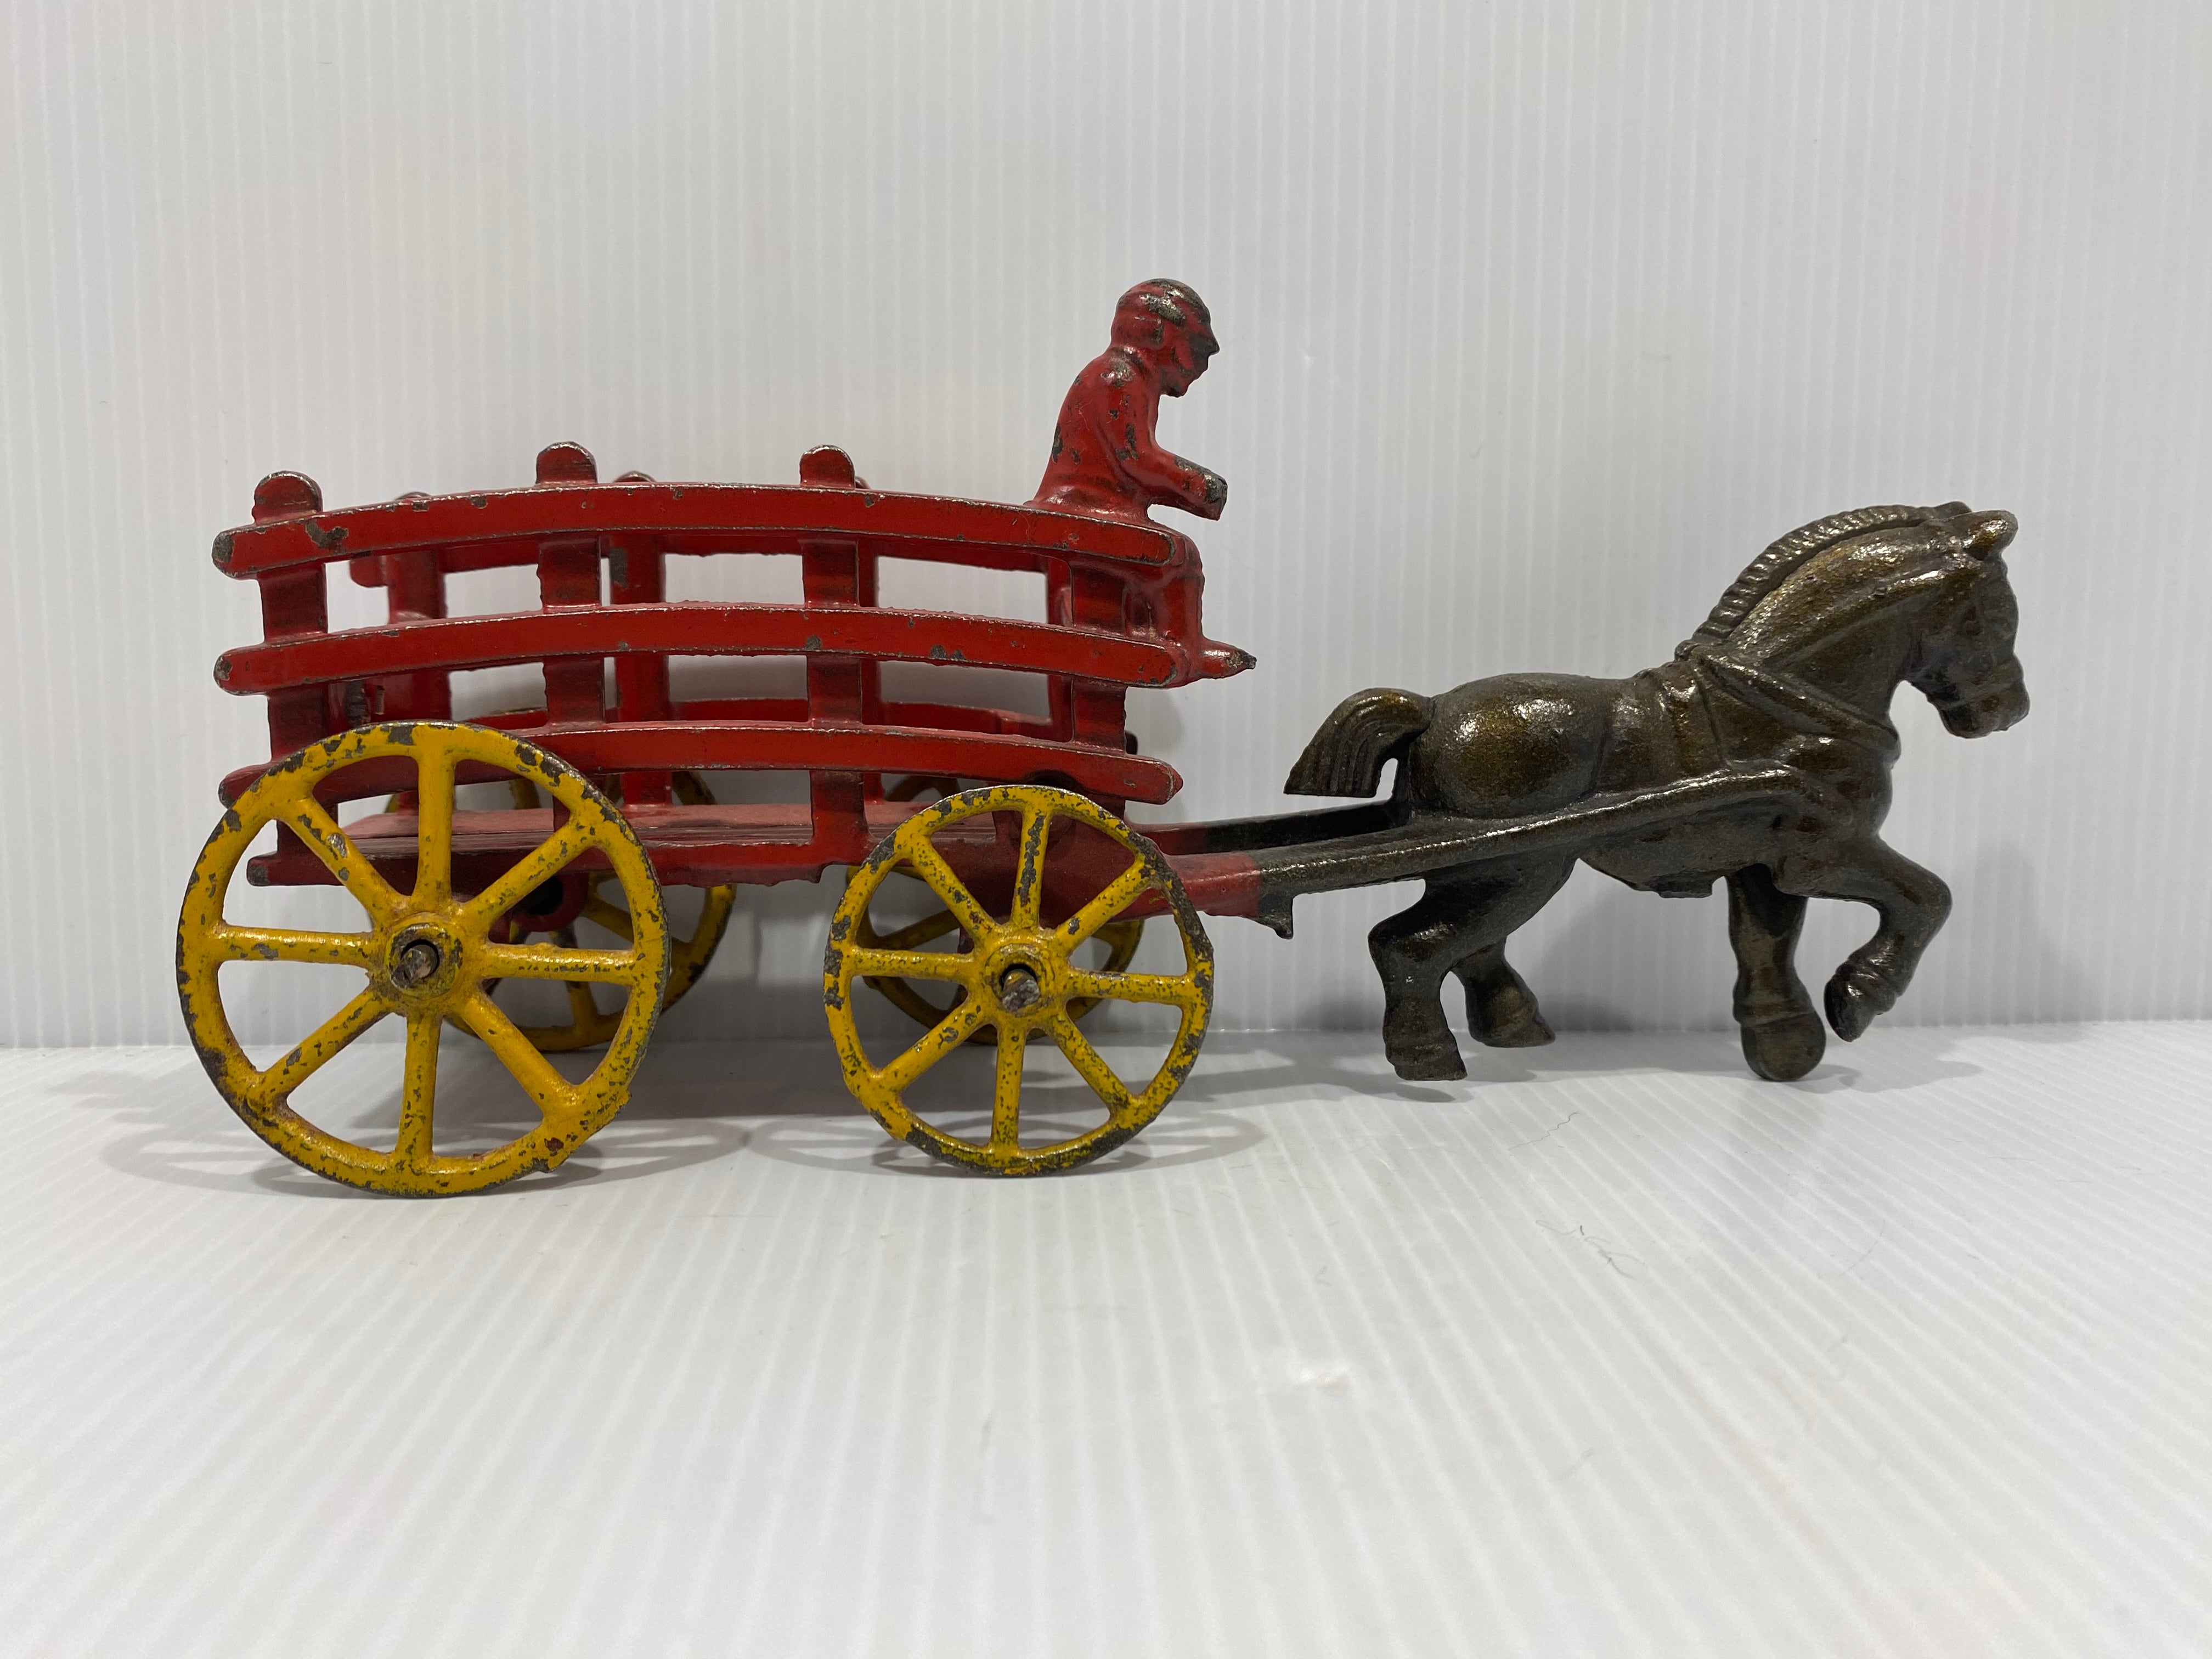 Original Red, stake wagons with cast in drivers. No cracks or repairs.